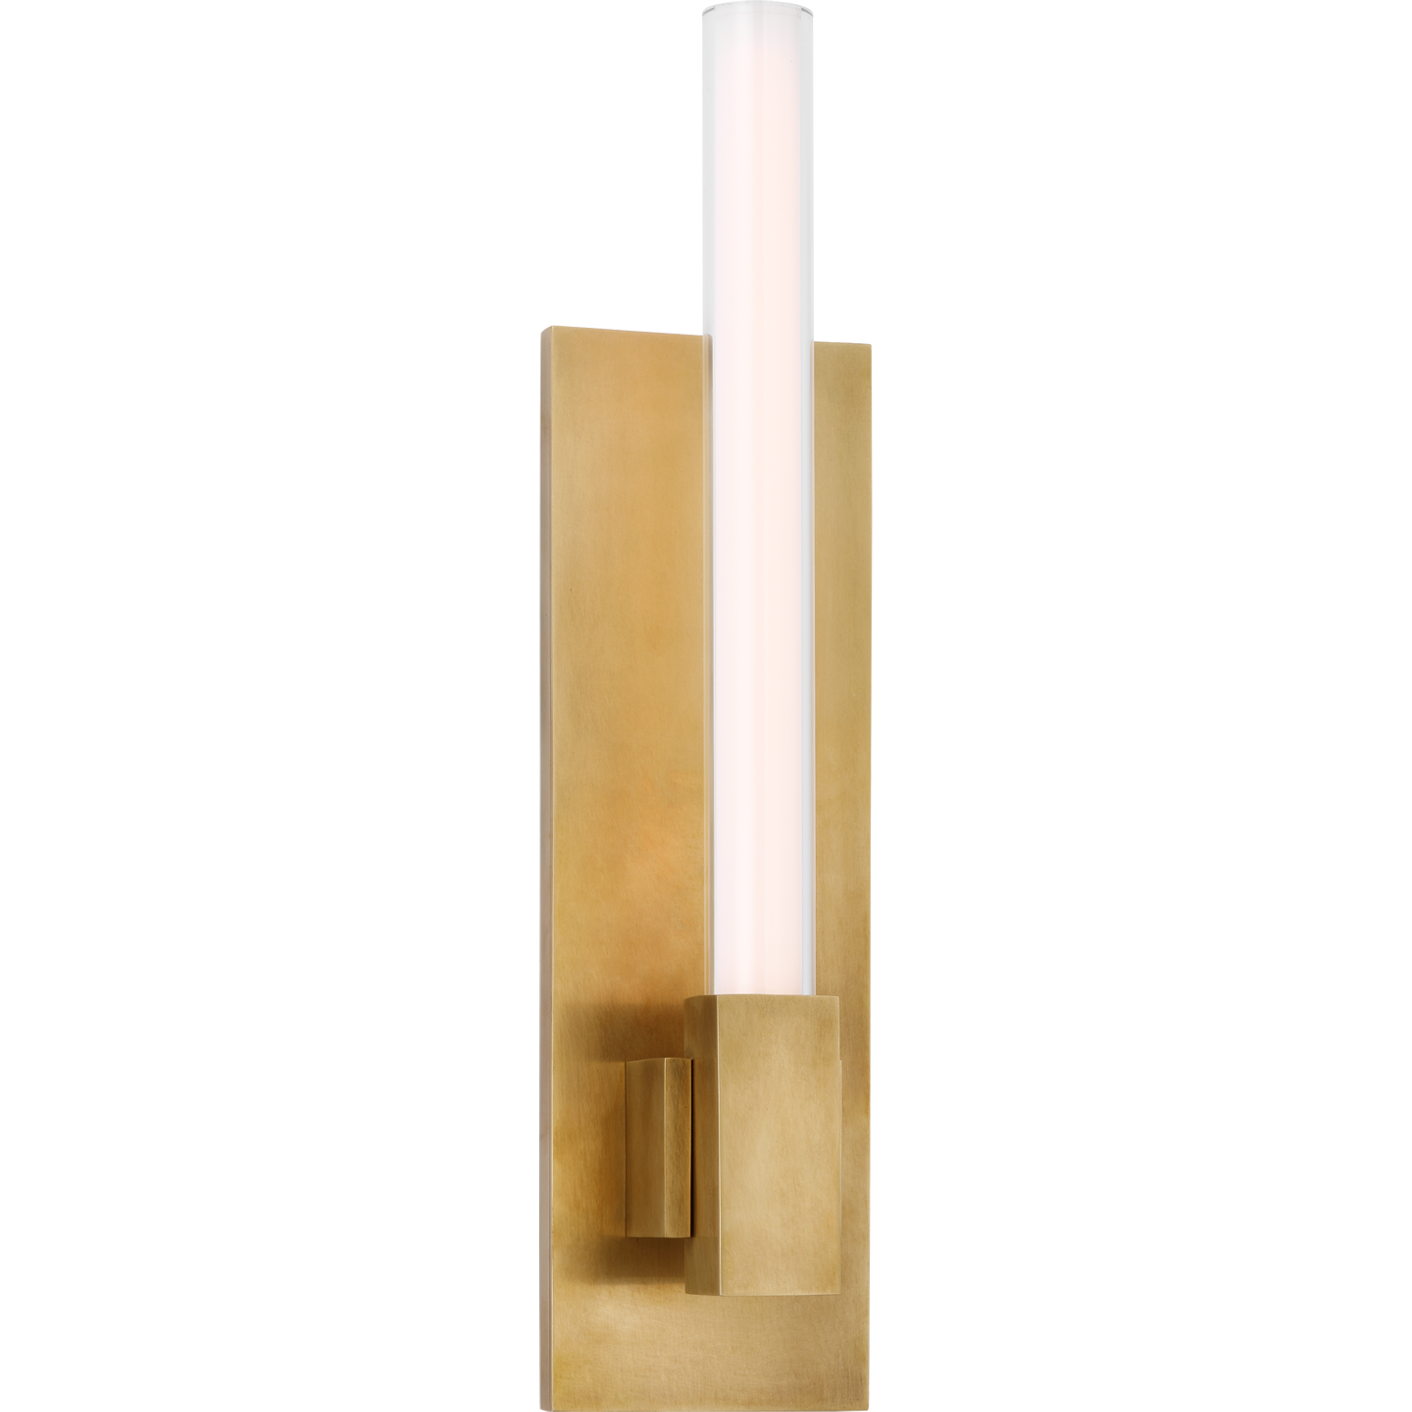 Mafra Small Reflector Sconce